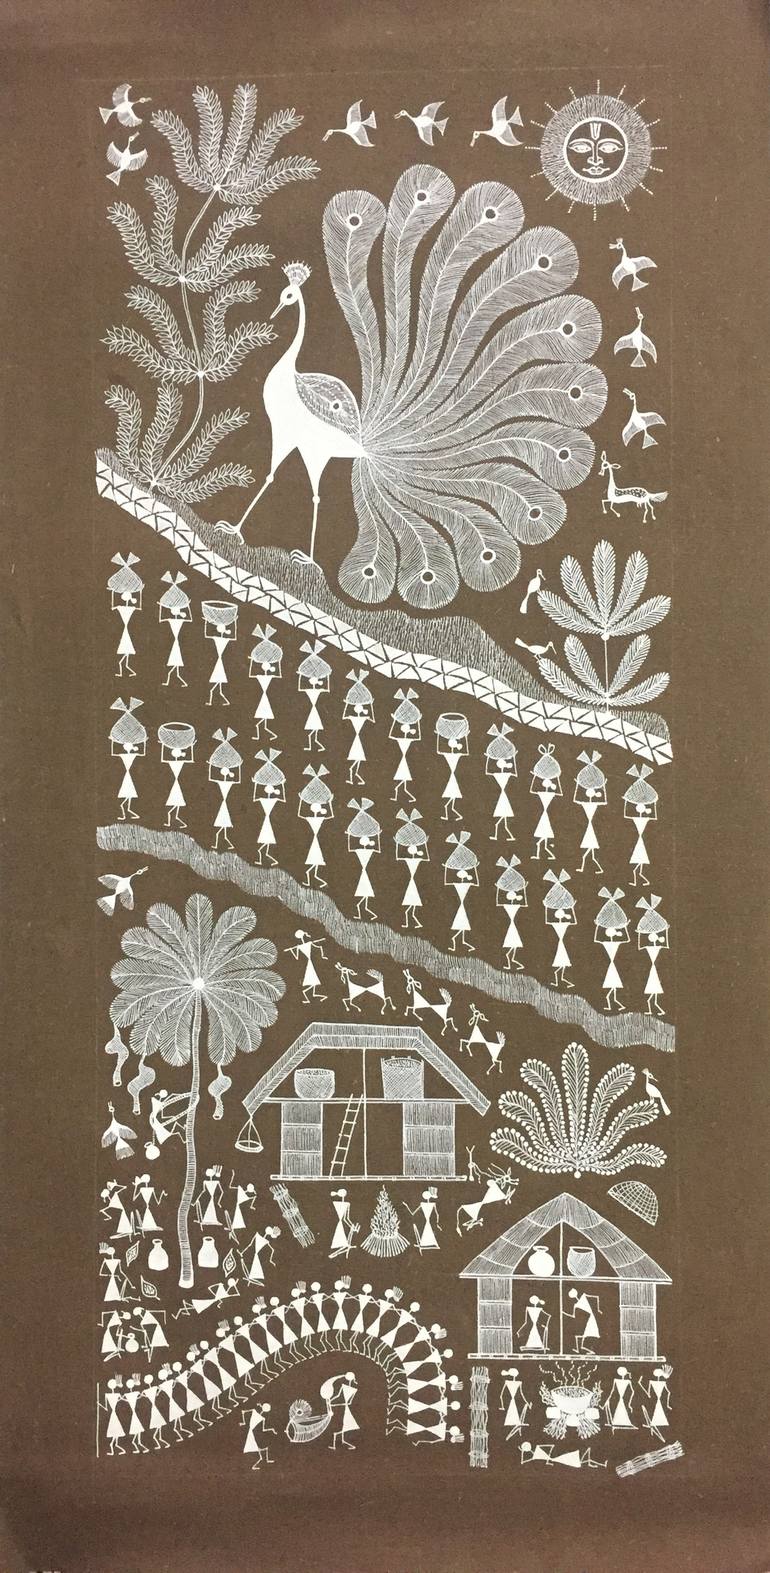 Traditional Indian Tribal Art